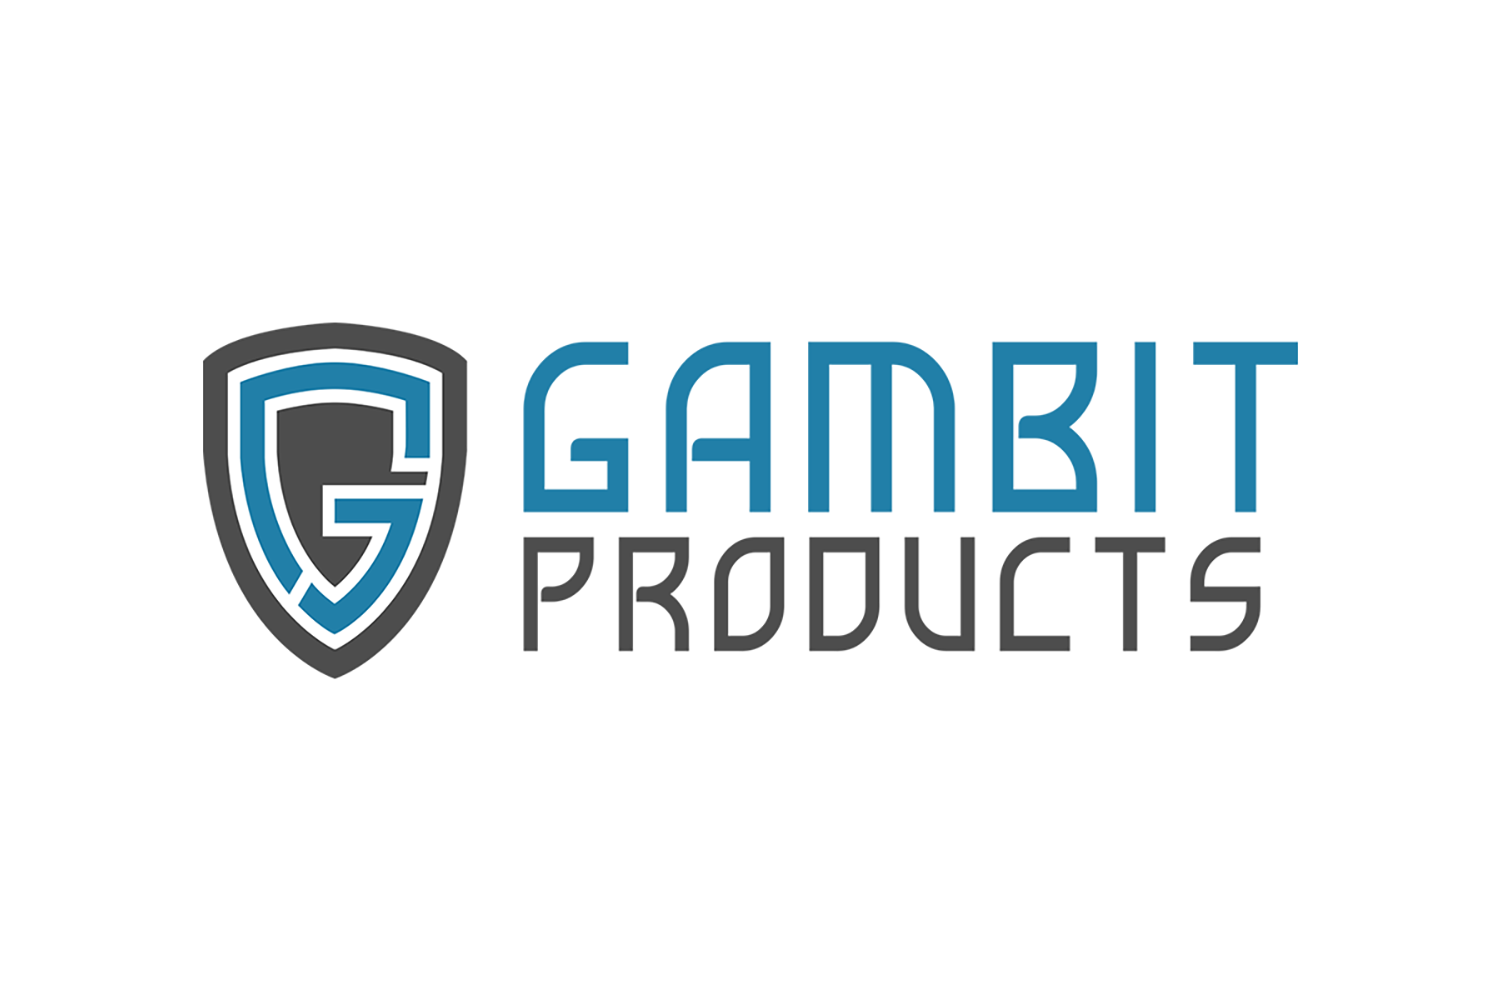 The official logo of the Gambit Products in East Liverpool, Ohio